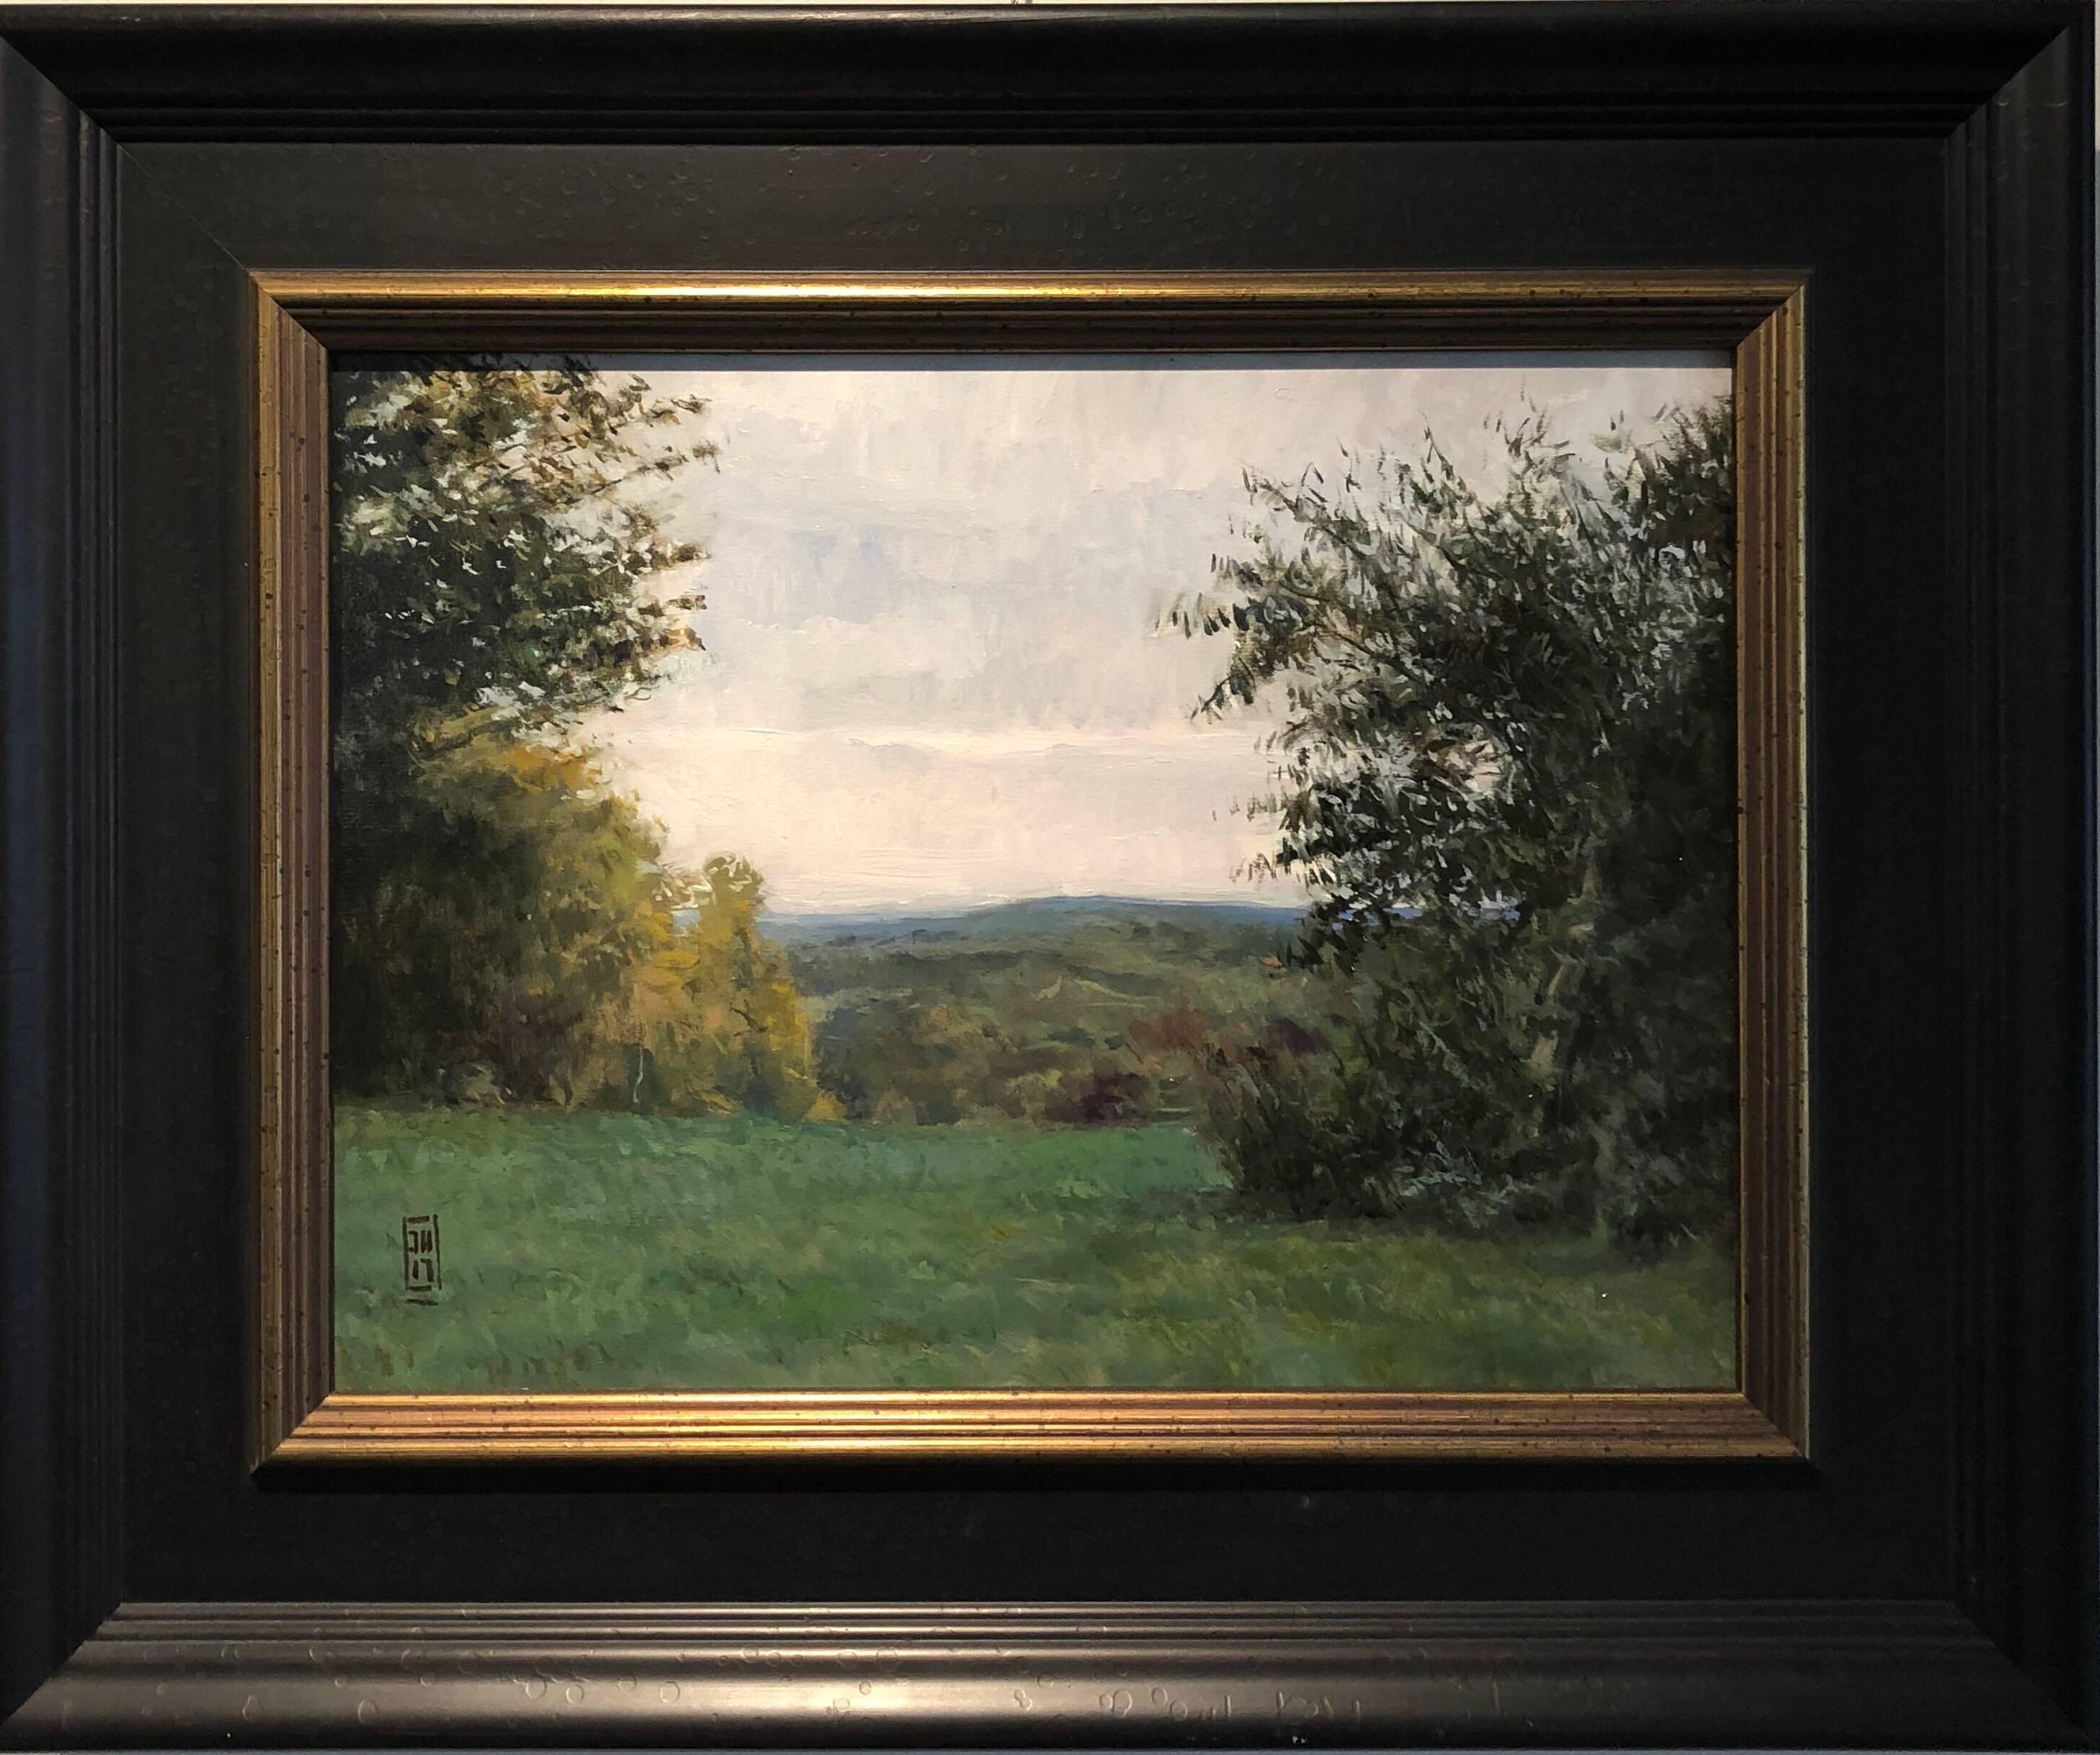 Green with Distant Hills - American Realist Painting by Jonathan Hayes